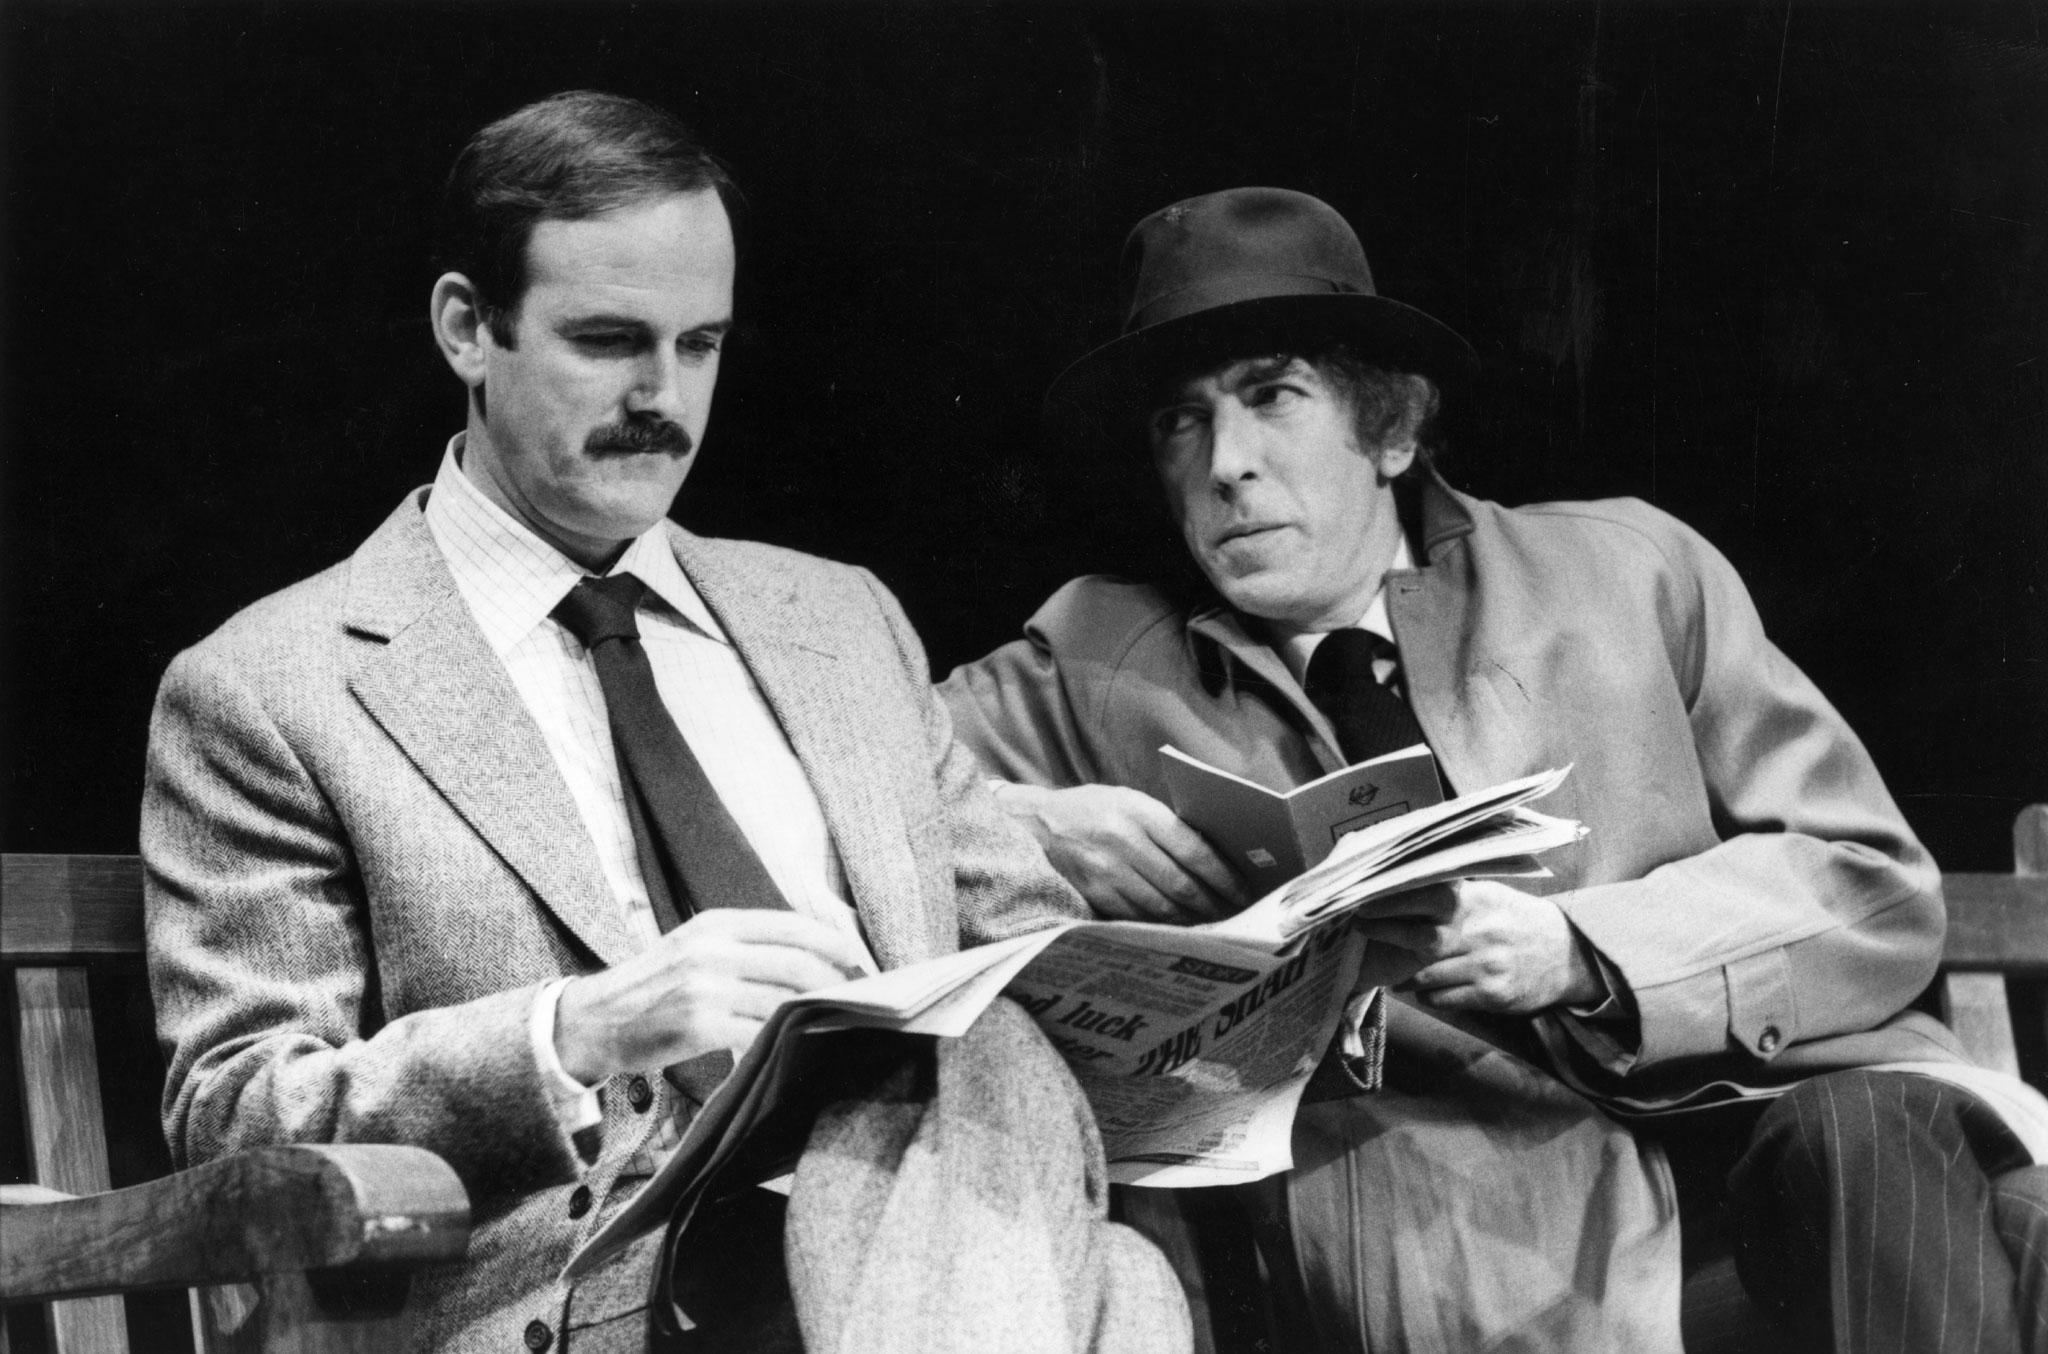 John Cleese (left) and Peter Cook during The Secret Policeman’s Ball in aid of Amnesty International in 1979